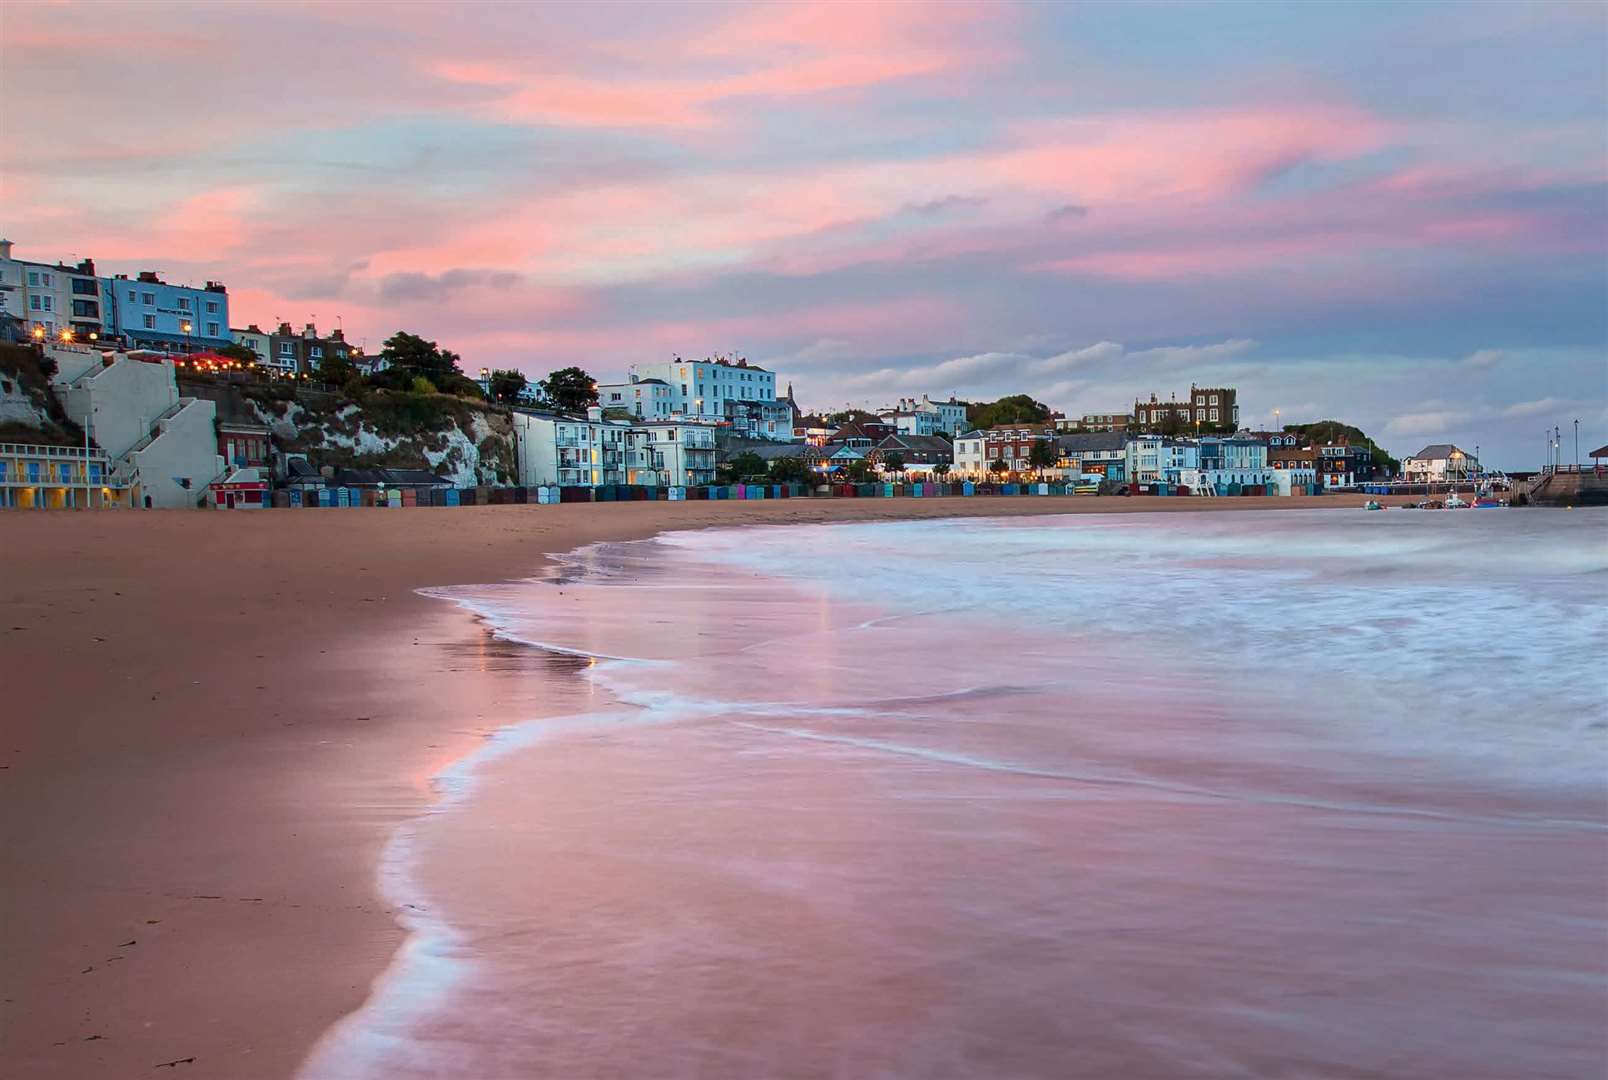 Broadstairs has fared better than its neighbours - Margate and Ramsgate. Picture: Visit Kent